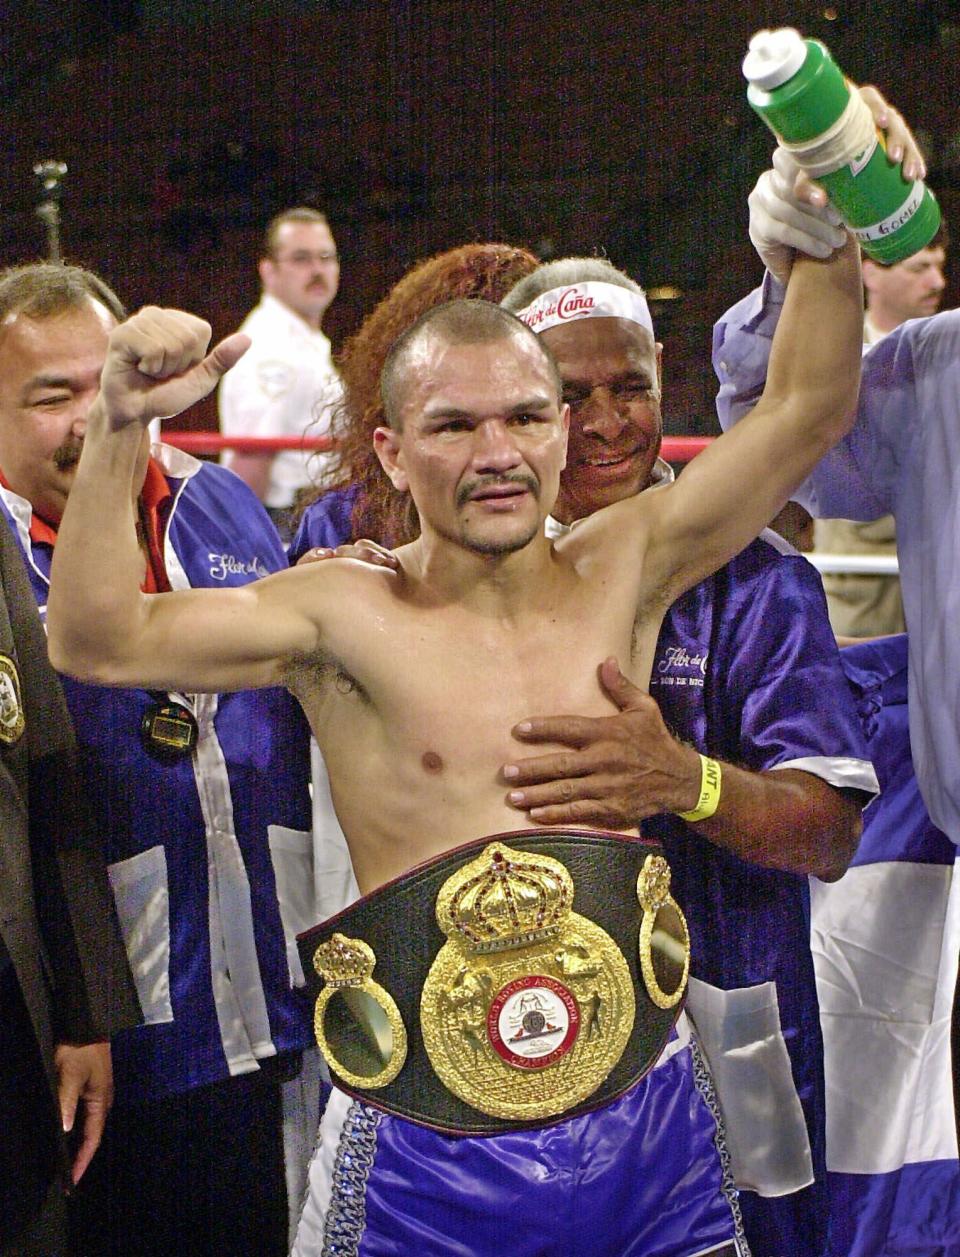 FILE - In this March 3, 2001 file photo, Nicaragua's Rosendo Alvarez celebrates his 12 round split decision over Colombia's Beibis Mendoza in their light flyweight championship fight in Las Vegas. With nearly all the world's sport shut down by the coronavirus pandemic, Nicaragua is hosting an event Saturday, April 25, 2020, with a full card of boxing matches before a live audience, organized by Alvarez, who — like the Central American nation's government — waved aside the threat of COVID-19. (AP Photo/Laura Rauch, File)